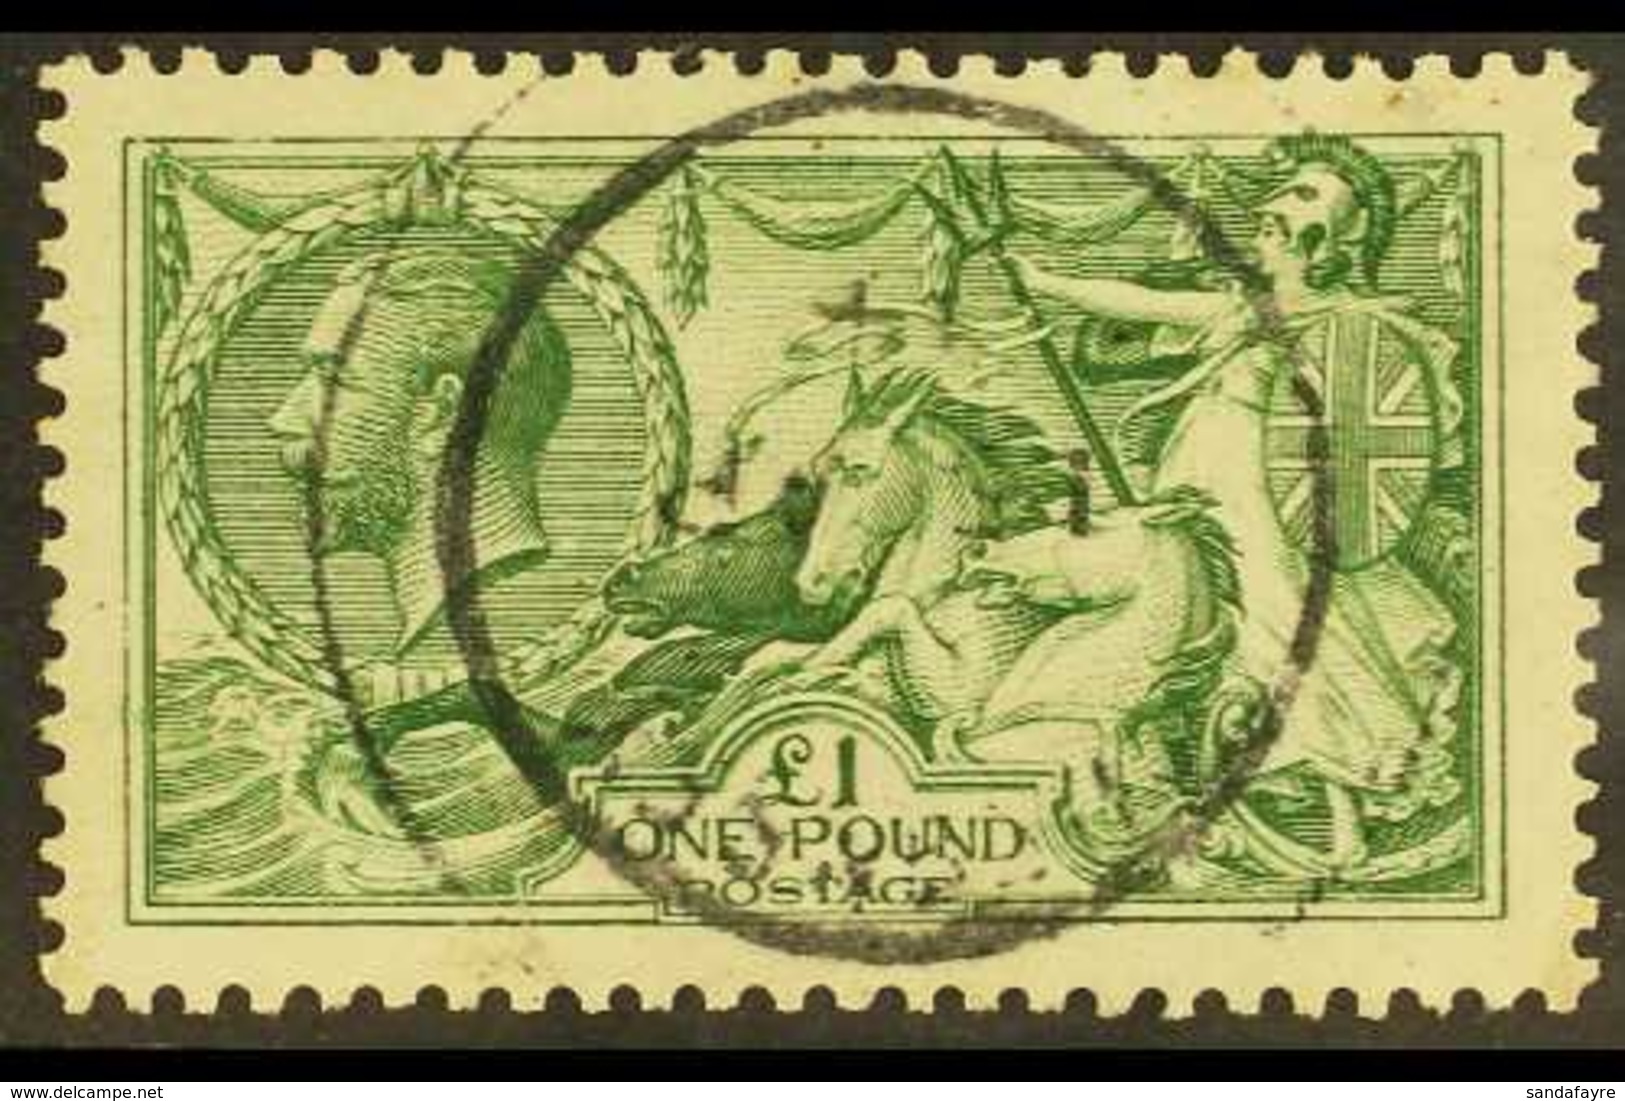 1913 £1 Green Waterlow Seahorse, SG 403, Very Fine Used, Well- Centered With Full Perfs & Bright Fresh Colour. For More  - Unclassified